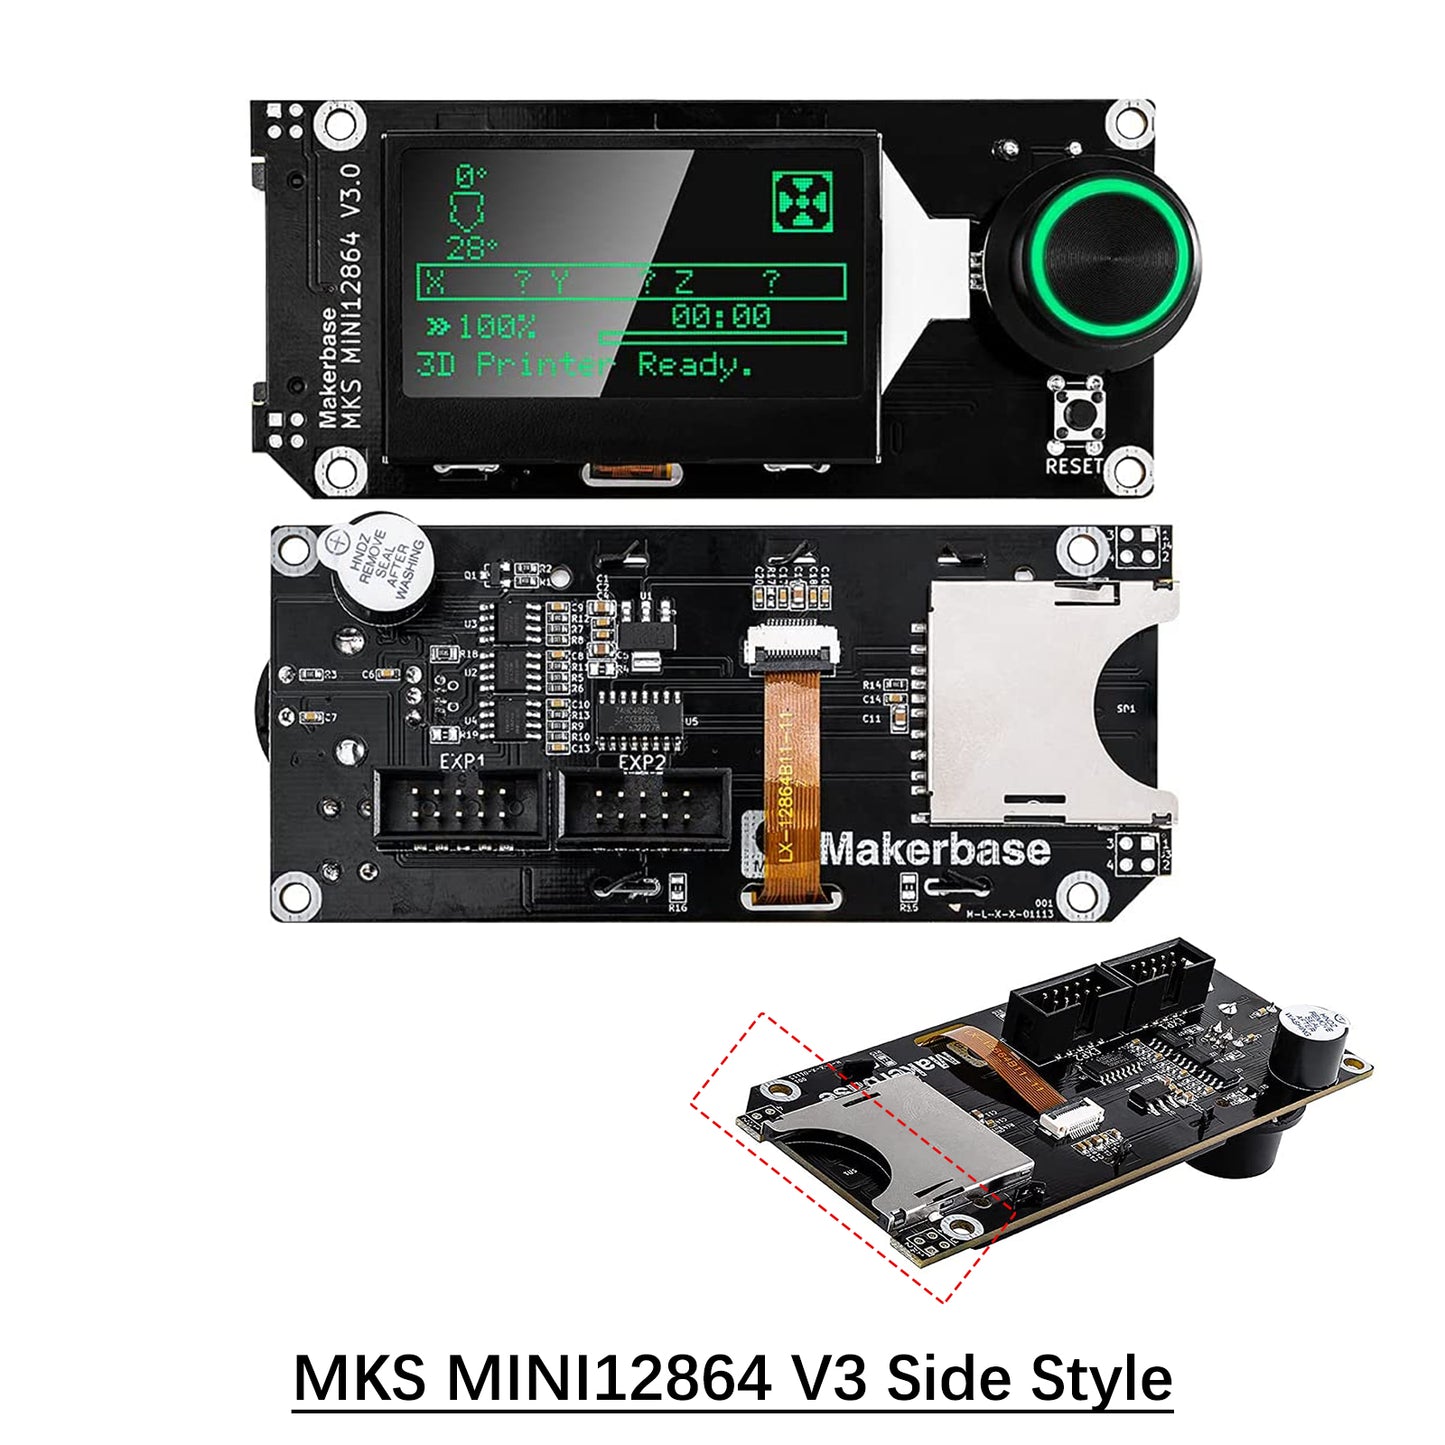 [MKS MINI12864 V3] LCD Smart Display Control Board Support SD Card Insertion (Front/Side Plug)